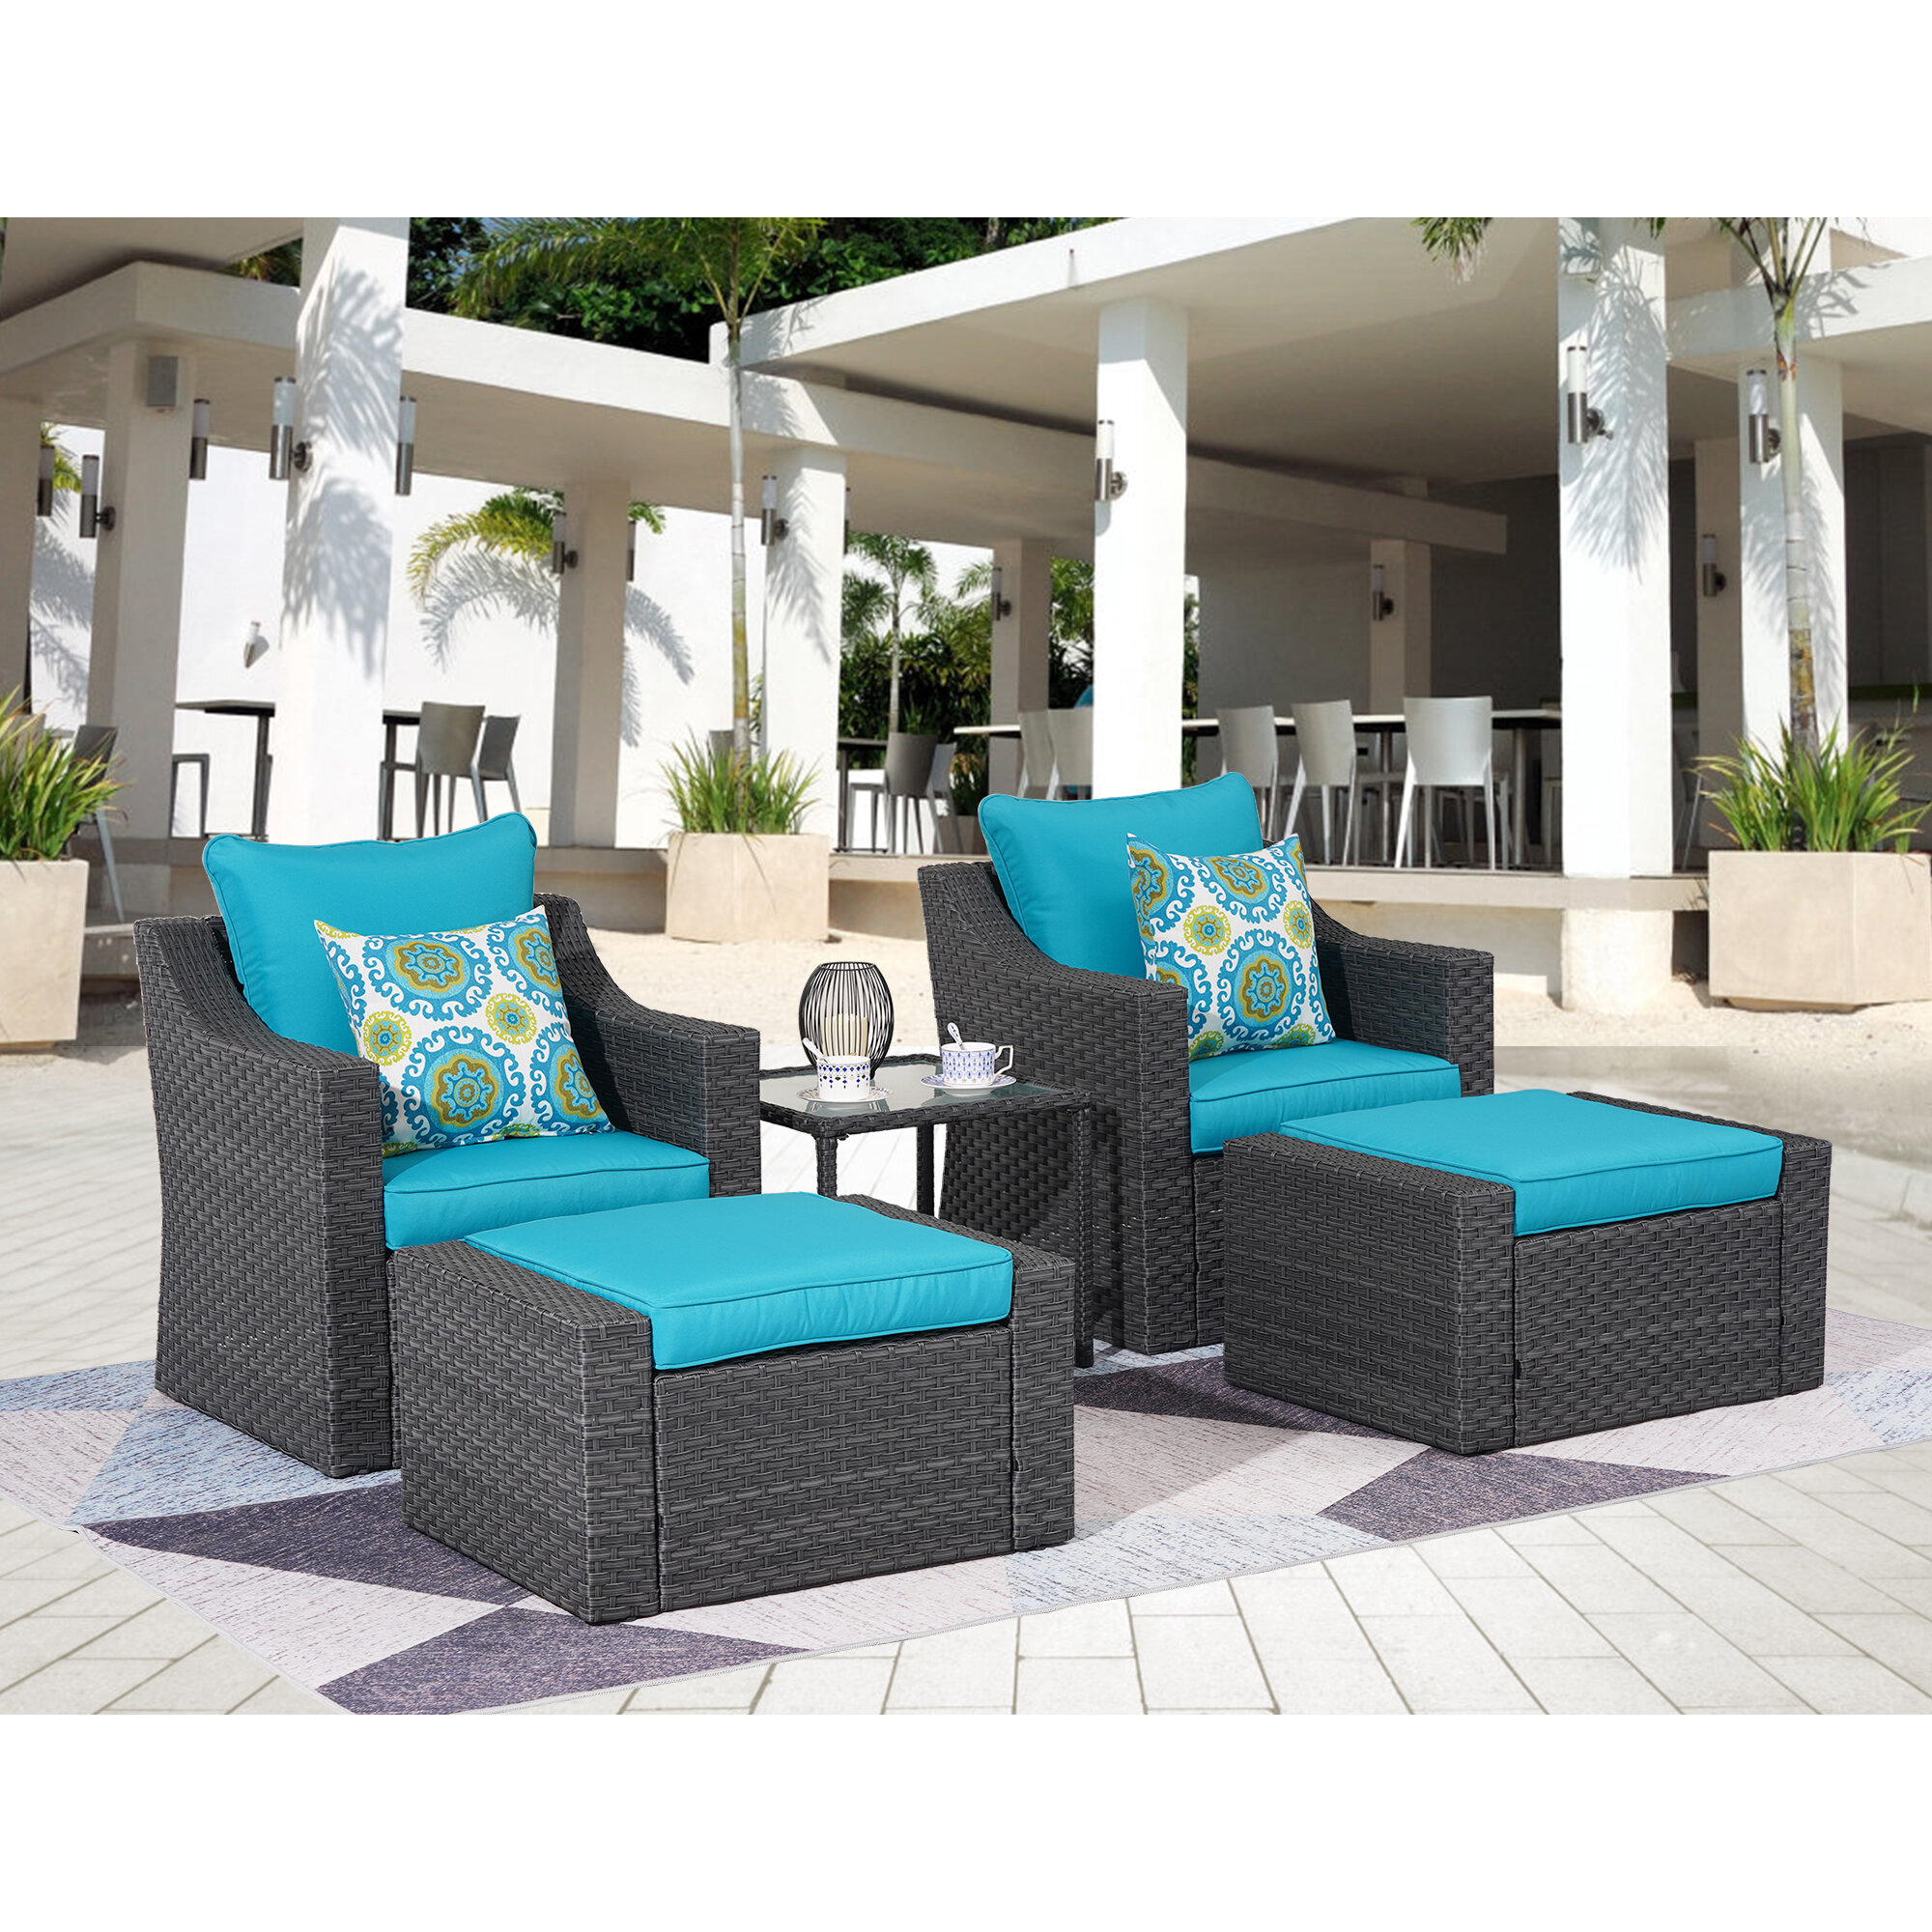 12 of the Best Deals from Wayfair's Outdoor Clearance Sale